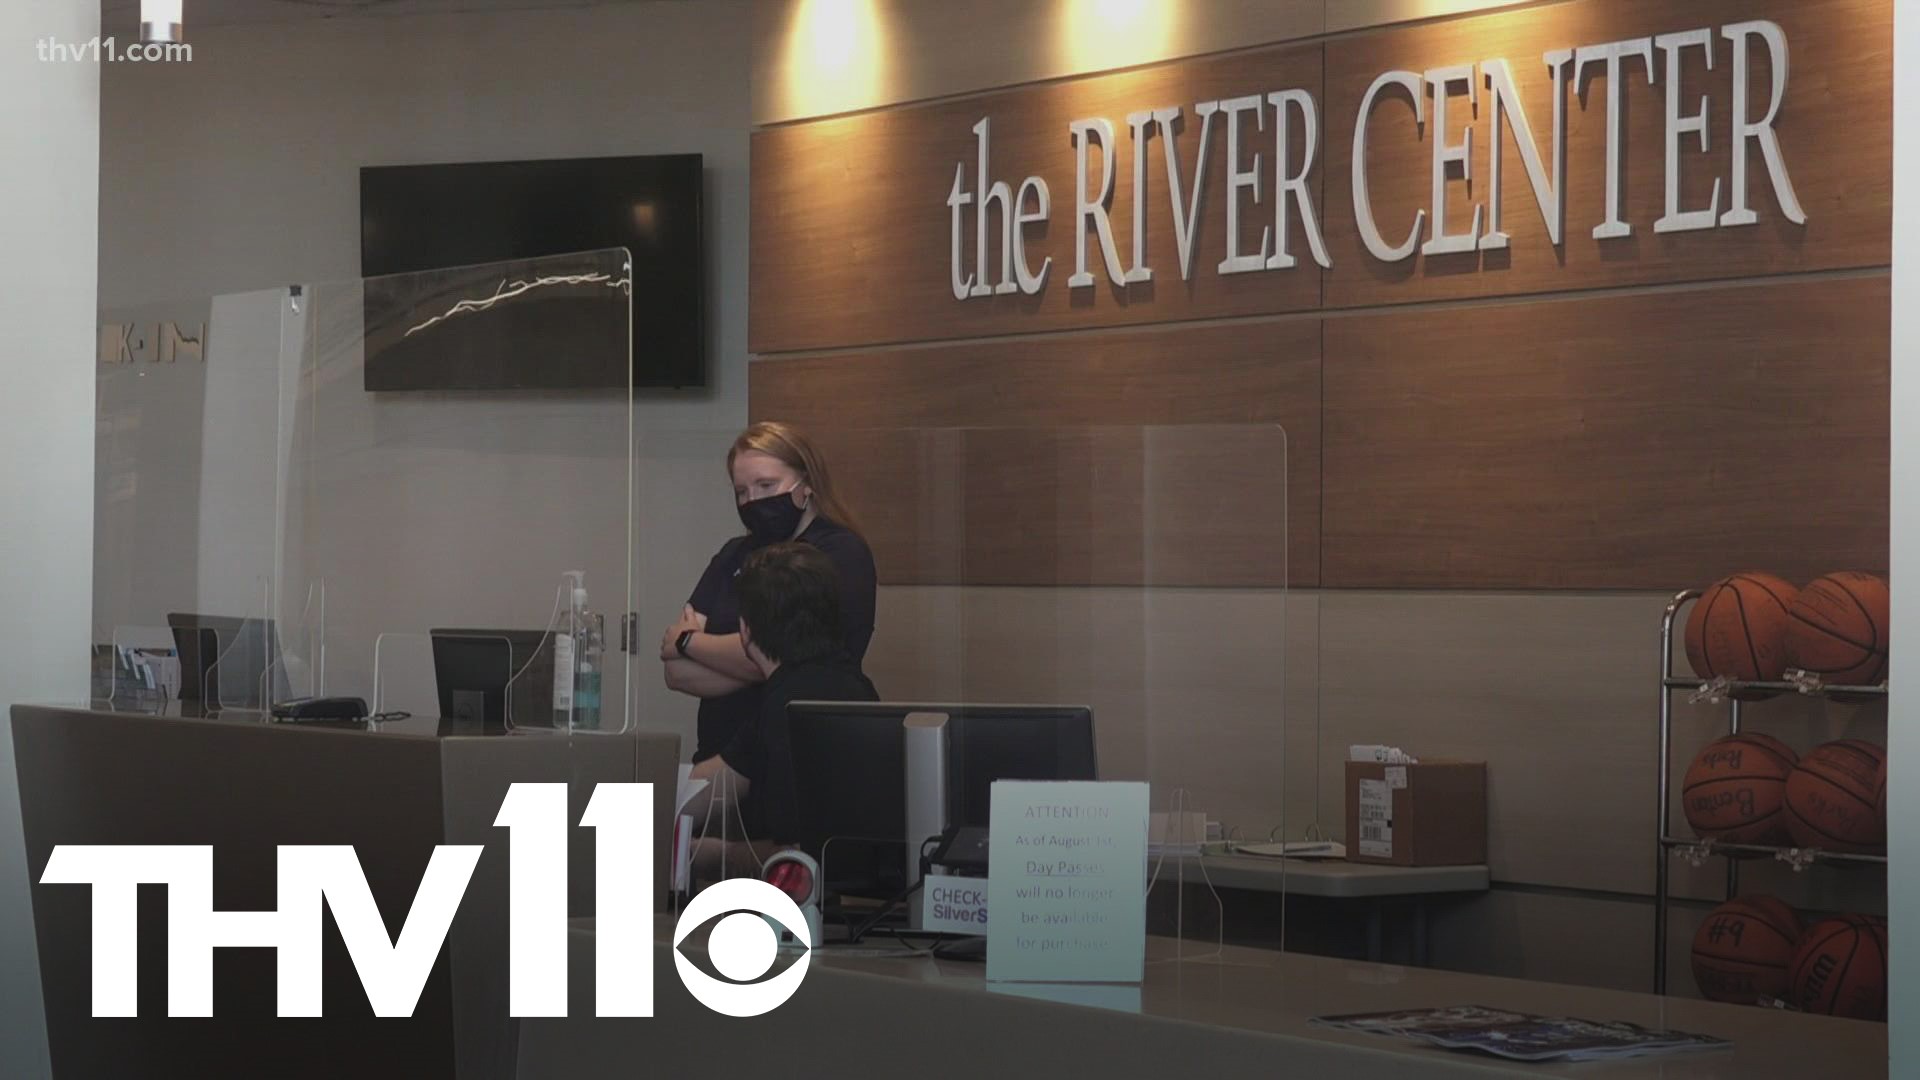 The River Center in Benton attracts thousands of people every week. Following a violent incident that occurred, the center is limiting who can visit.